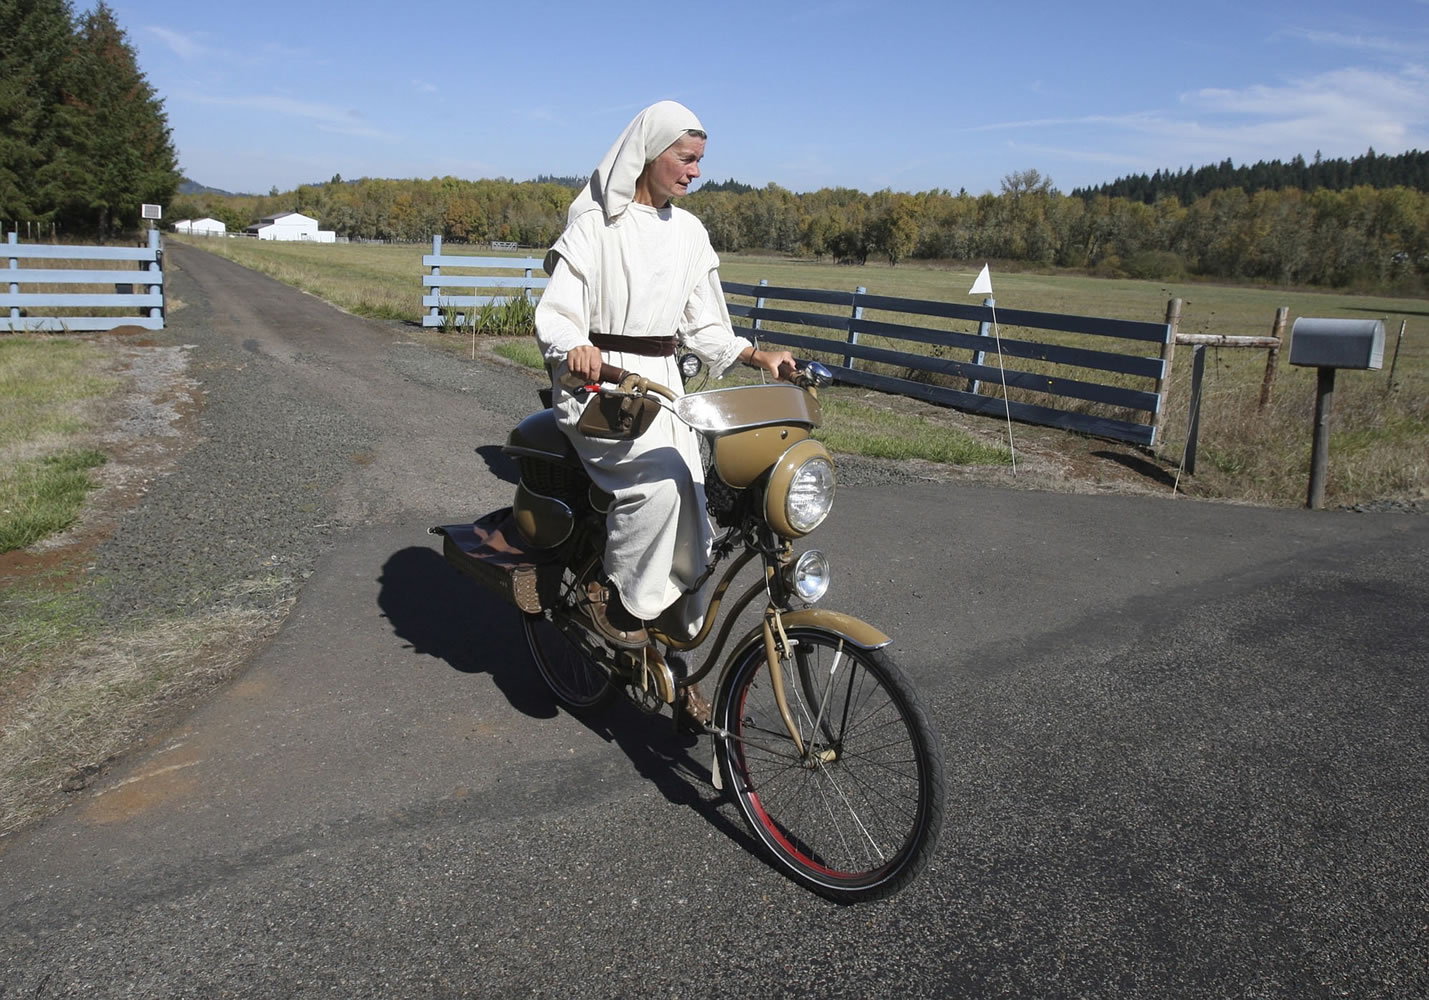 Photos by Collin Andrew/The Register-Guard
Cheryl Cutler rides a bike she built herself from old bike parts, recycled mobile home siding and kitchen pots near Lorane, Ore. Cheryl and her husband, Eli, have chosen to live a simple life as they caretake property in rural Lane County.